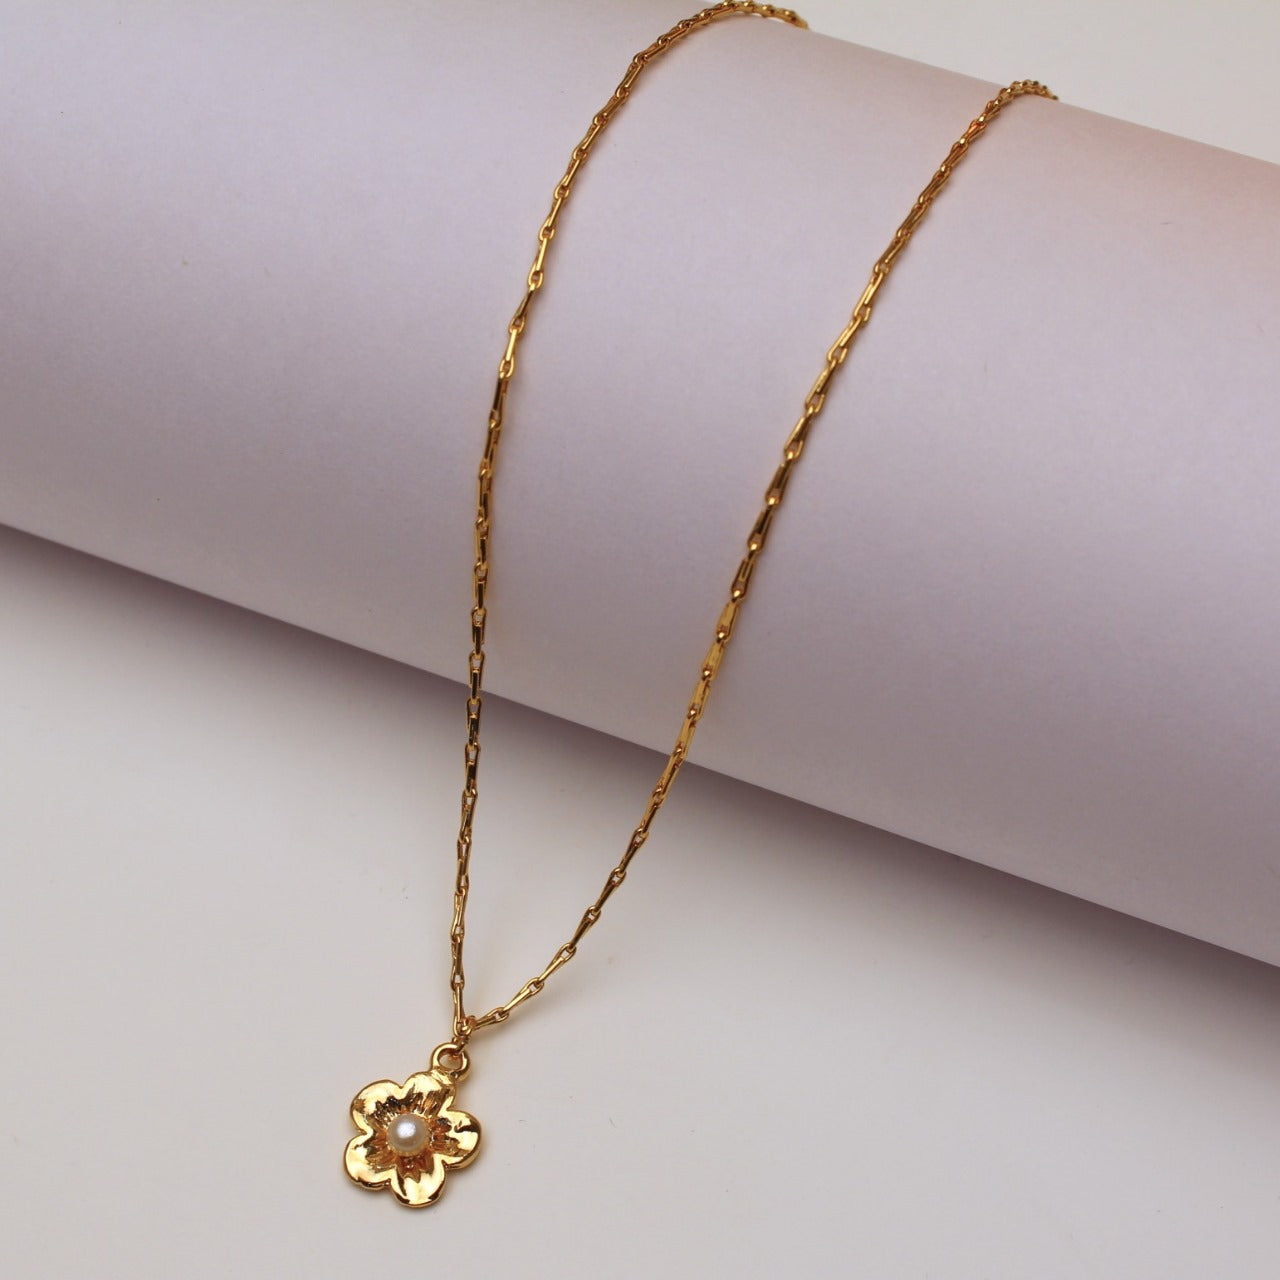 TFC 24K Small Cutie Floral Gold Plated Pendant Necklace